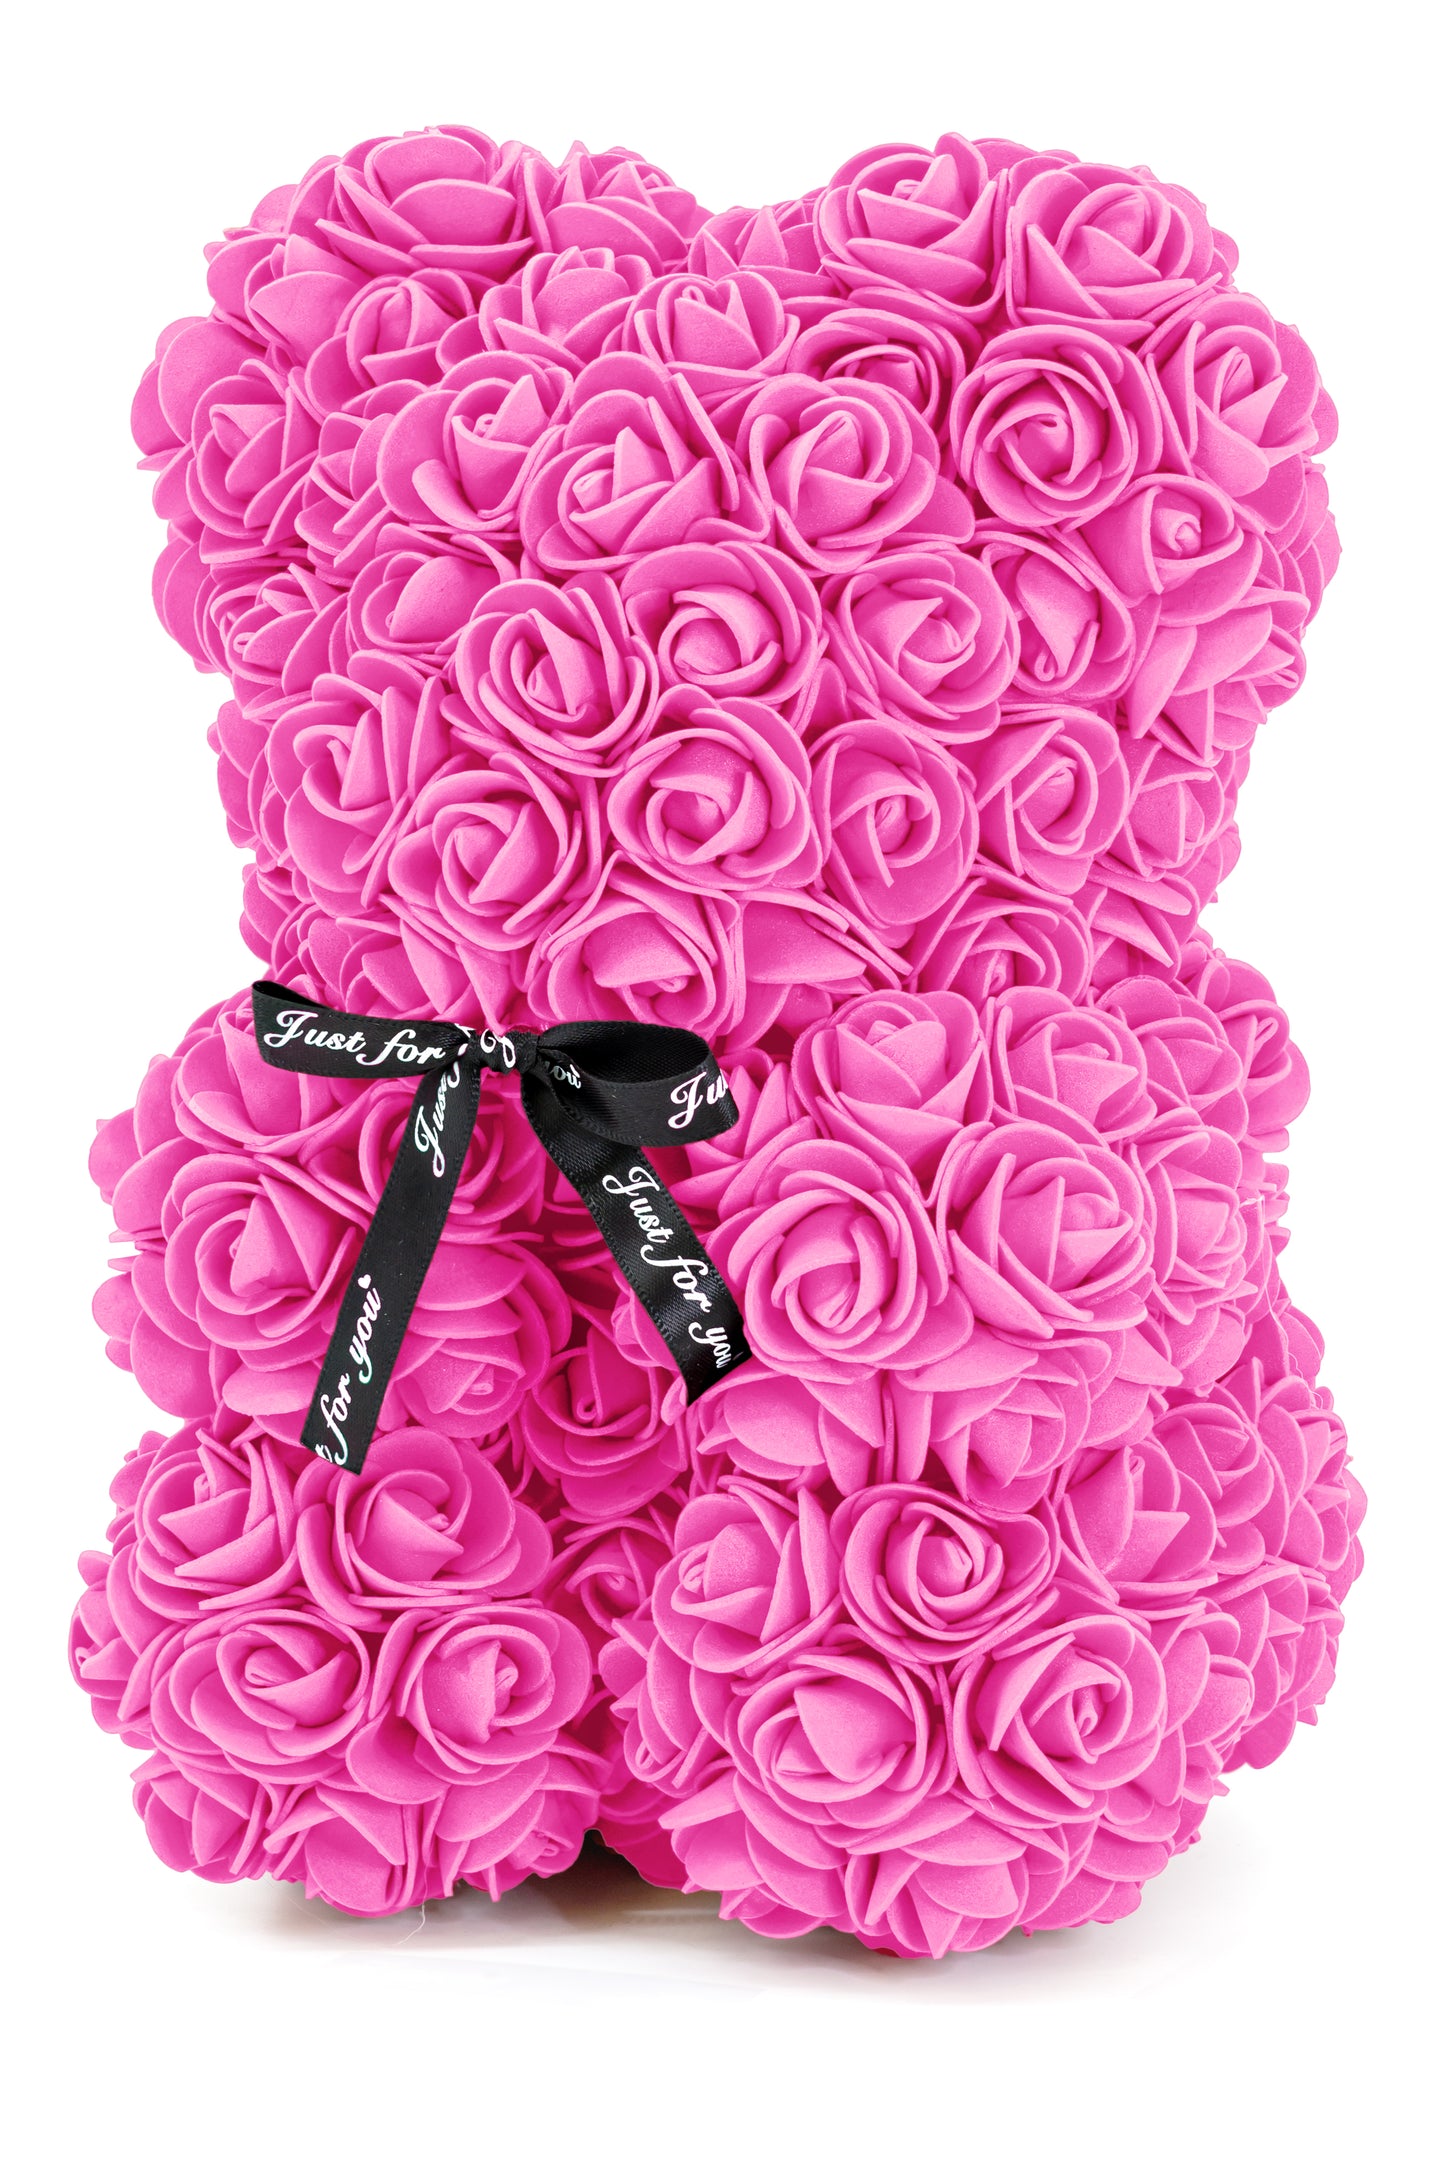 A bear shape decorative piece covered in pink color foam flowers. With a black bow ribbon around underneath the head.